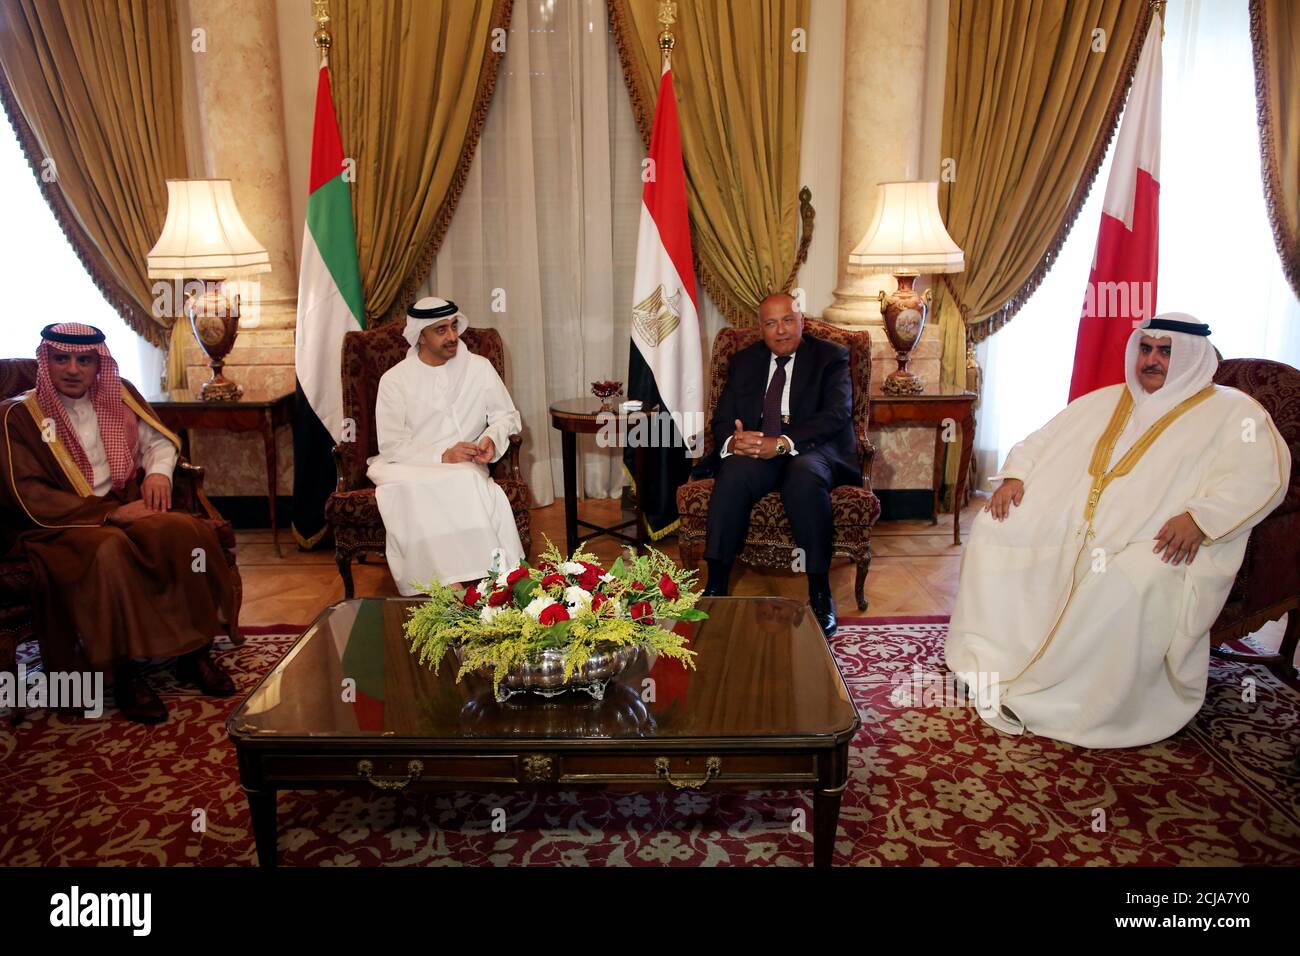 Saudi Foreign Minister Adel al-Jubeir (L), UAE Foreign Minister Abdullah  bin Zayed al-Nahyan (C-L), Egyptian Foreign Minister Sameh Shoukry (C-R),  and Bahraini Foreign Minister Khalid bin Ahmed al-Khalifa meet to discuss  the